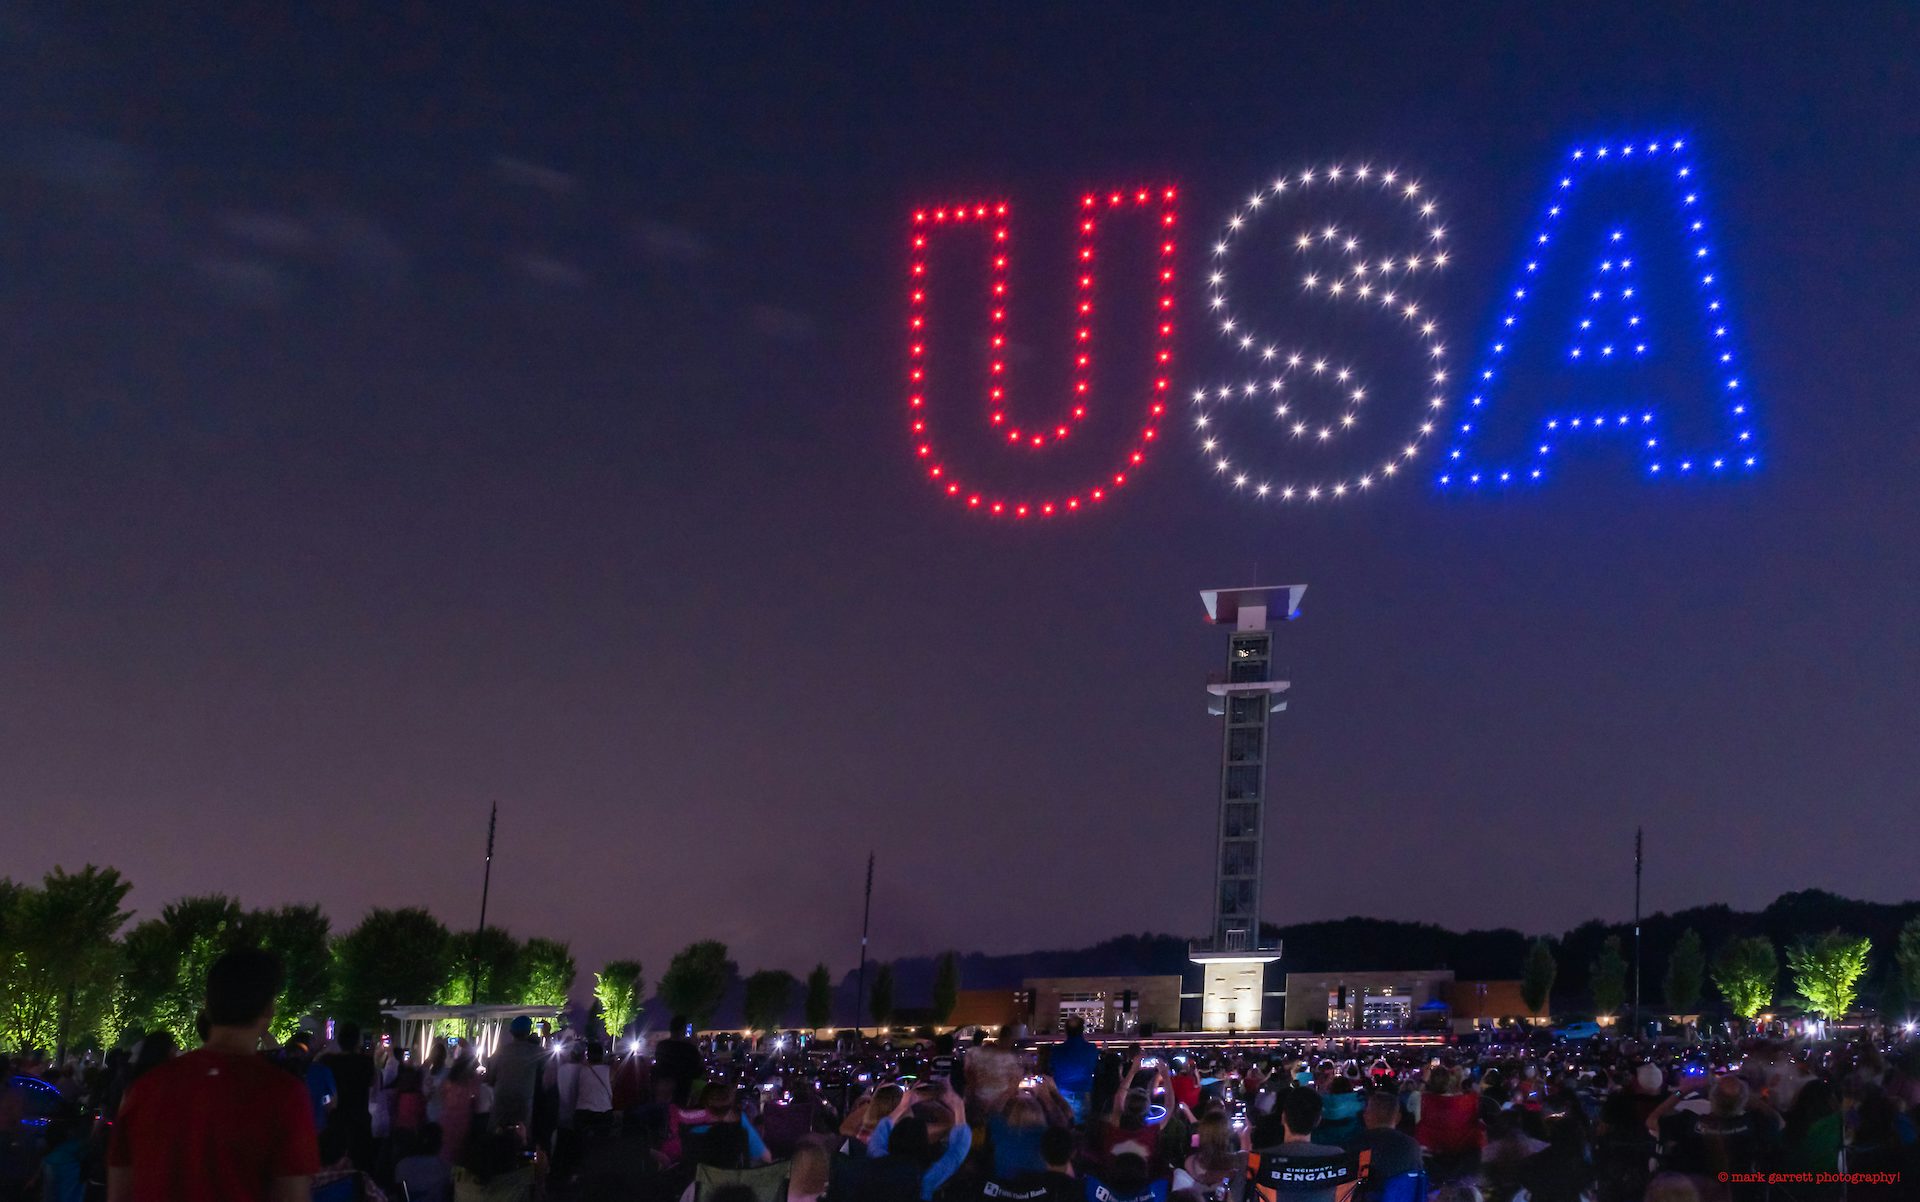 Verge Aero flies USA as letters using a swarm of light show drones on the 4th of July.